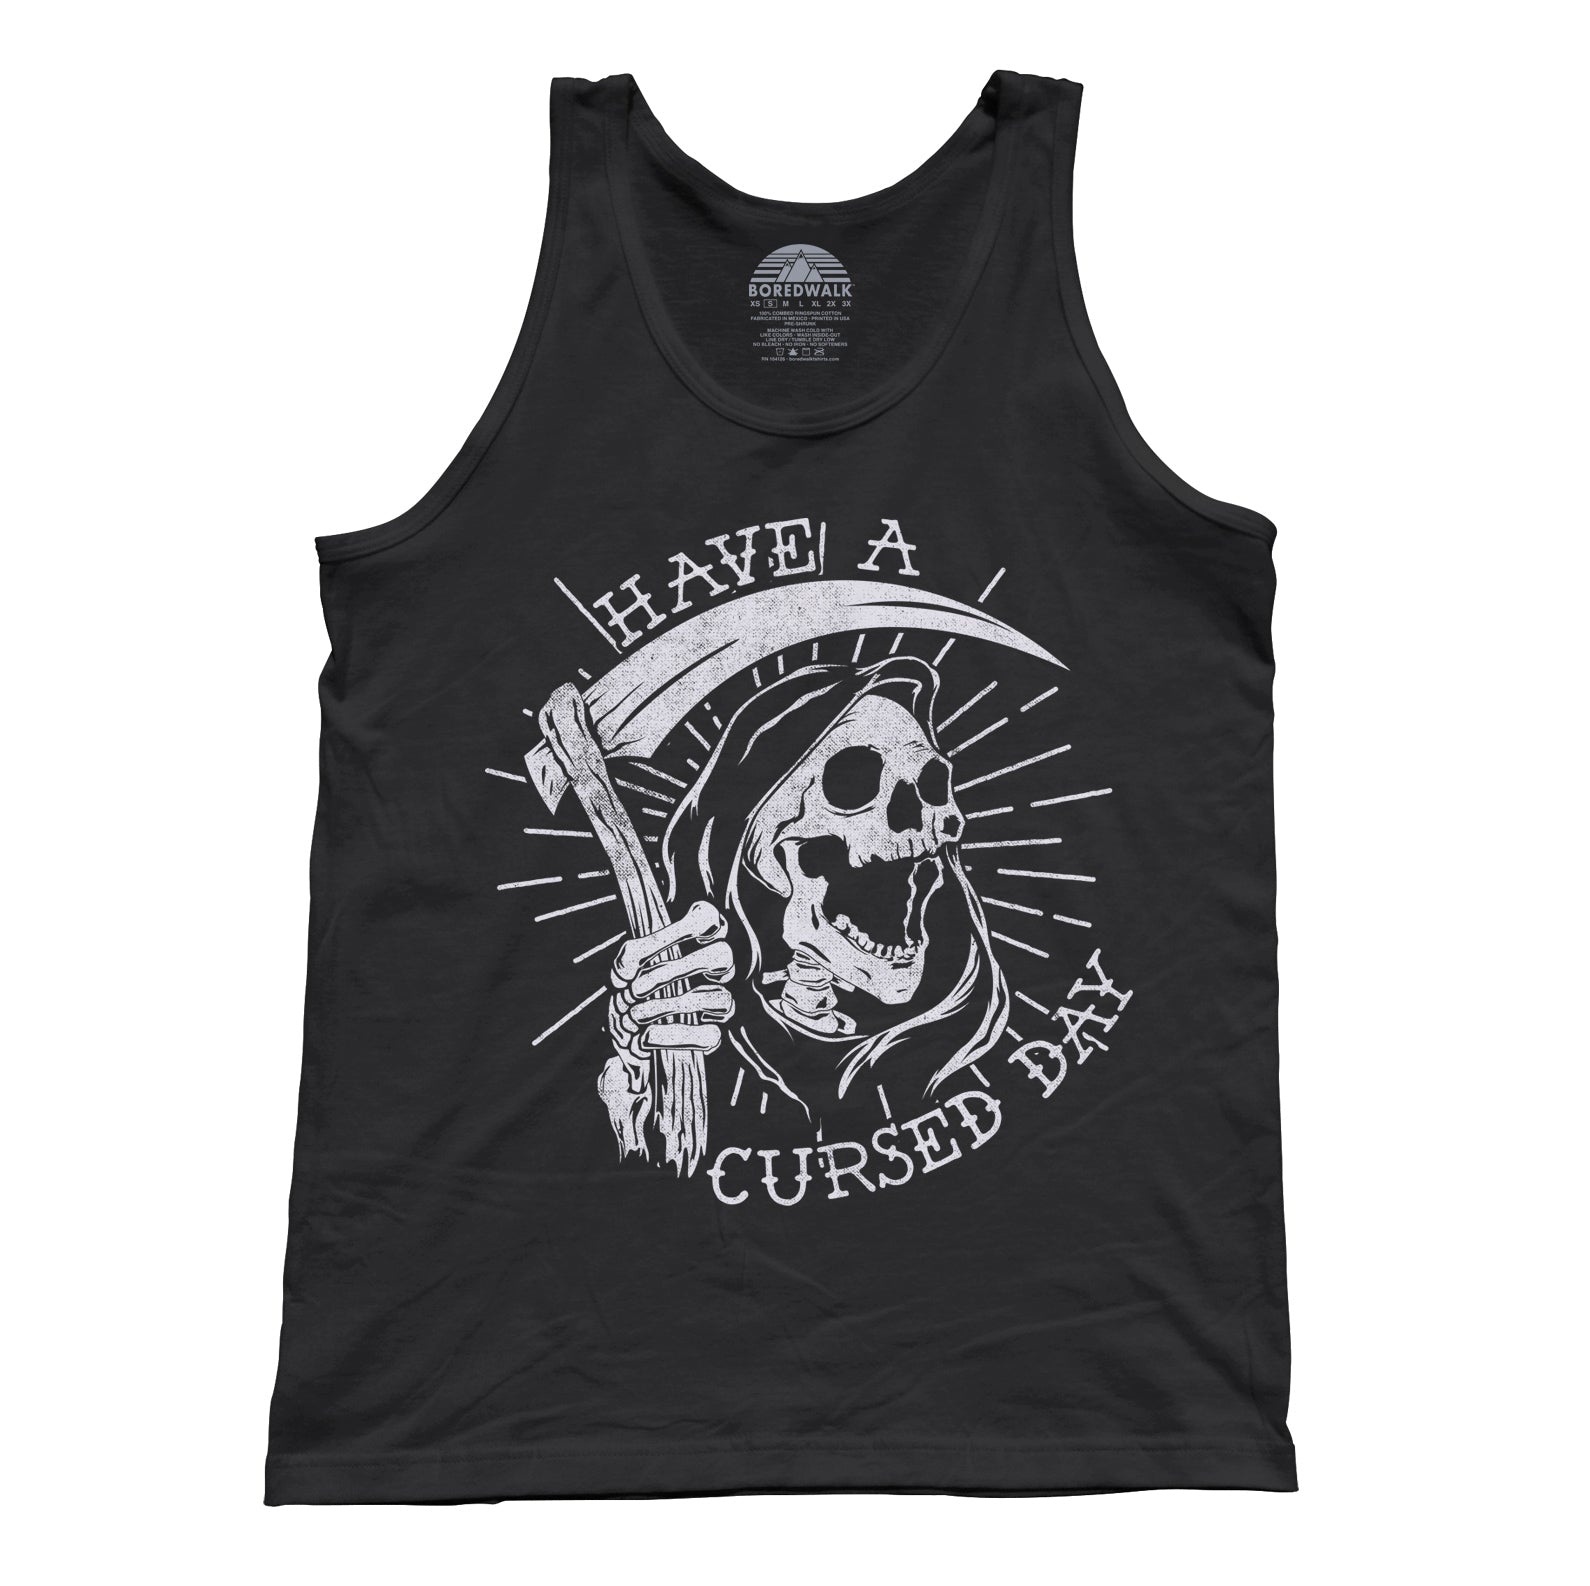 Unisex Have a Cursed Day Tank Top